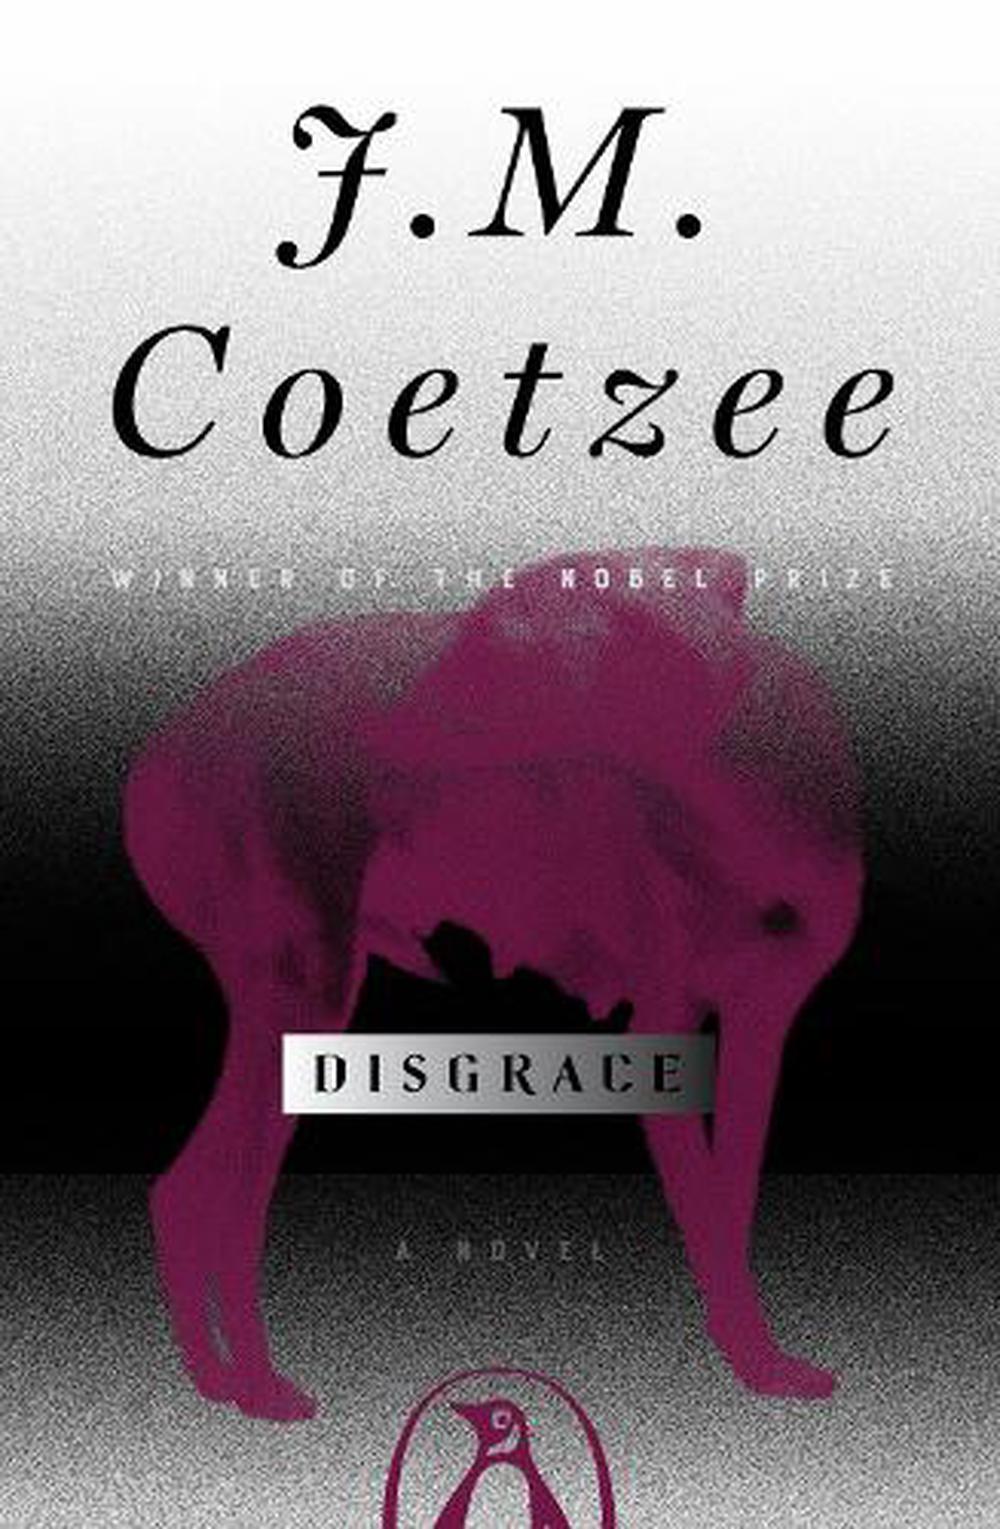 disgrace book review new york times